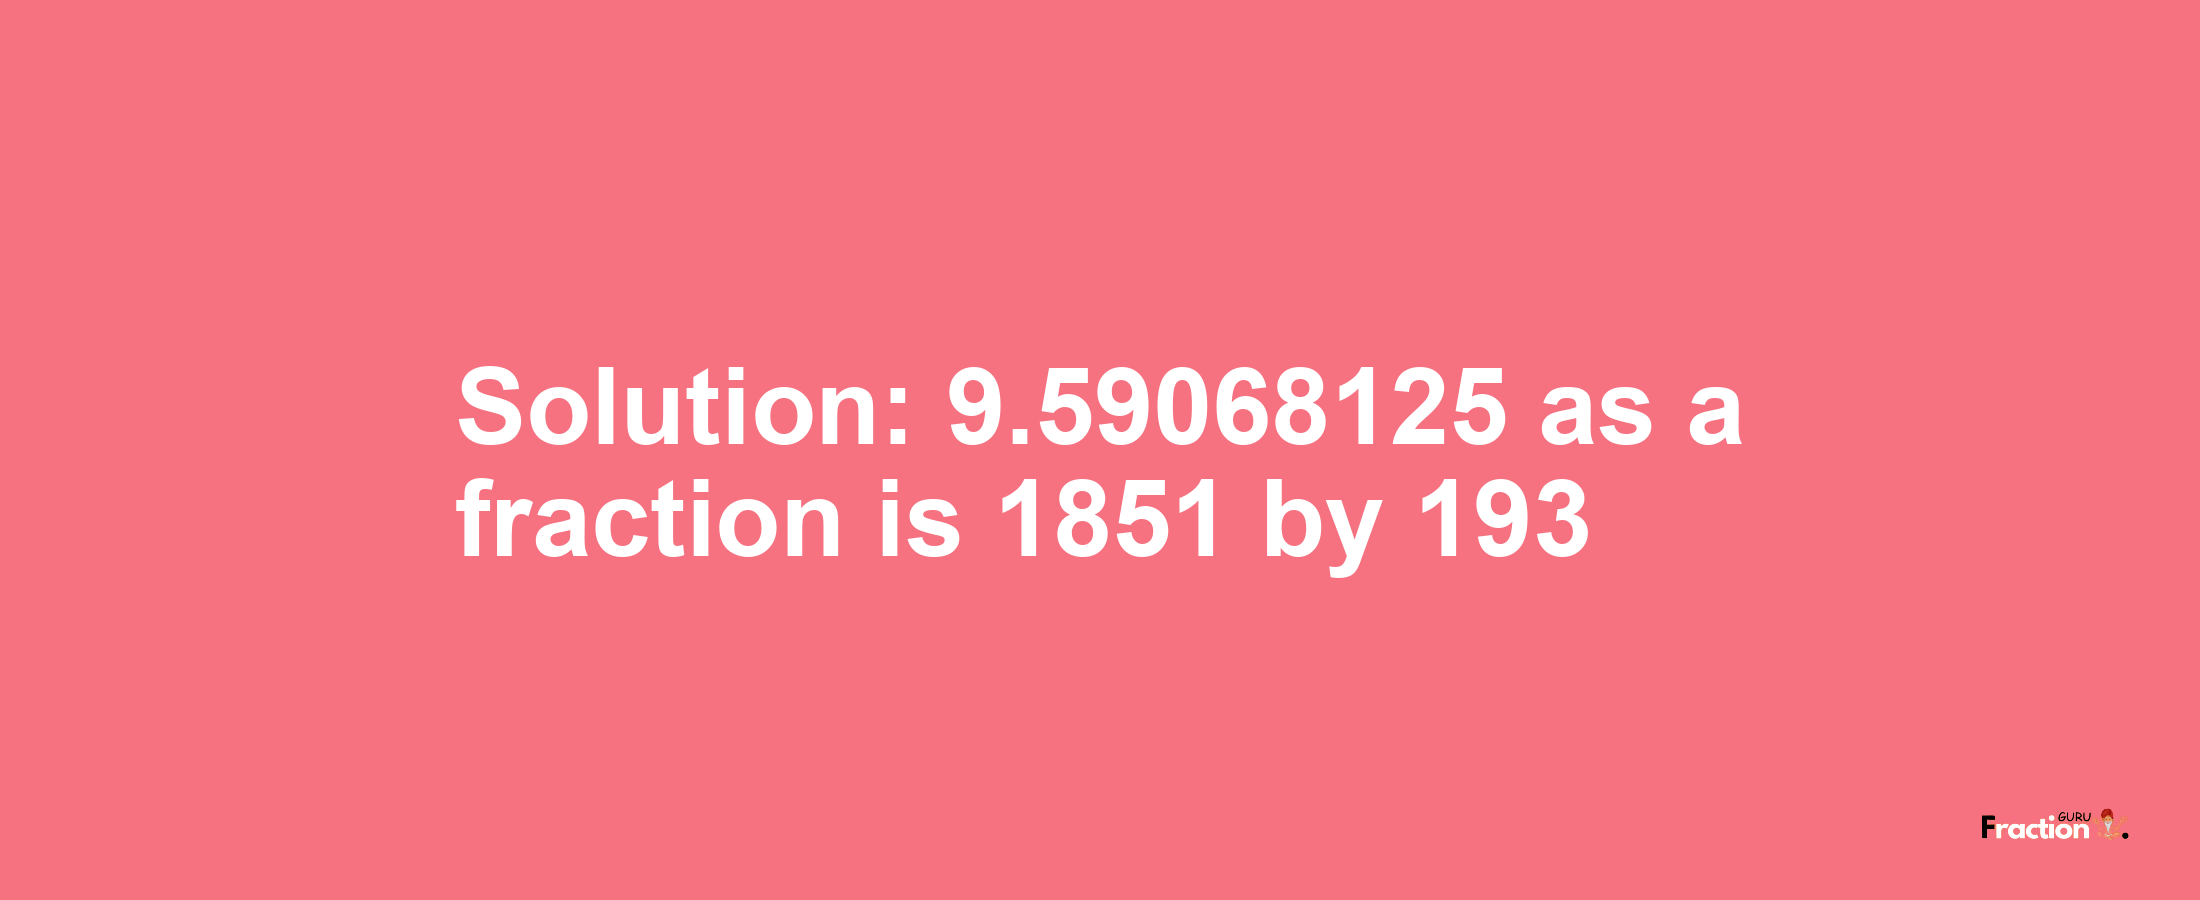 Solution:9.59068125 as a fraction is 1851/193